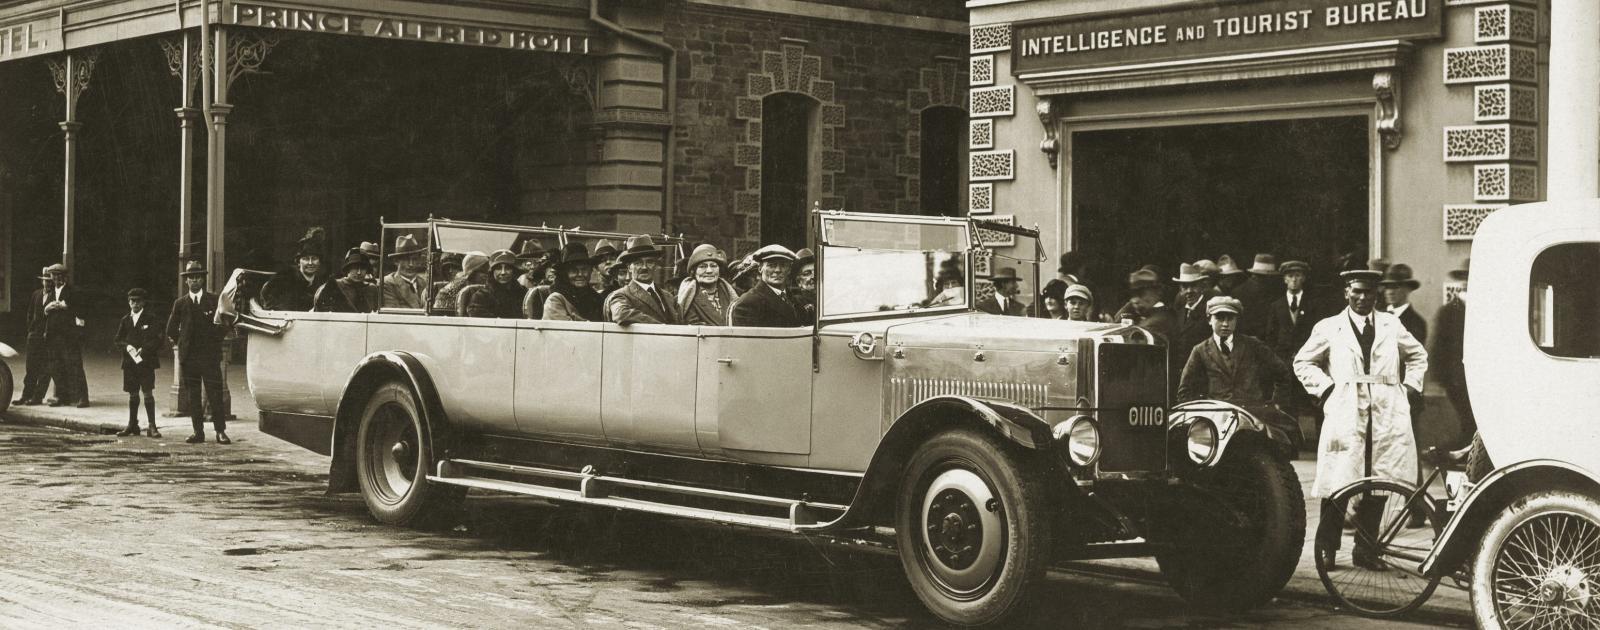 Charabanc parked in front of the Intelligence and Tourist Bureau, King William St, 1926. SLSA: B 3996